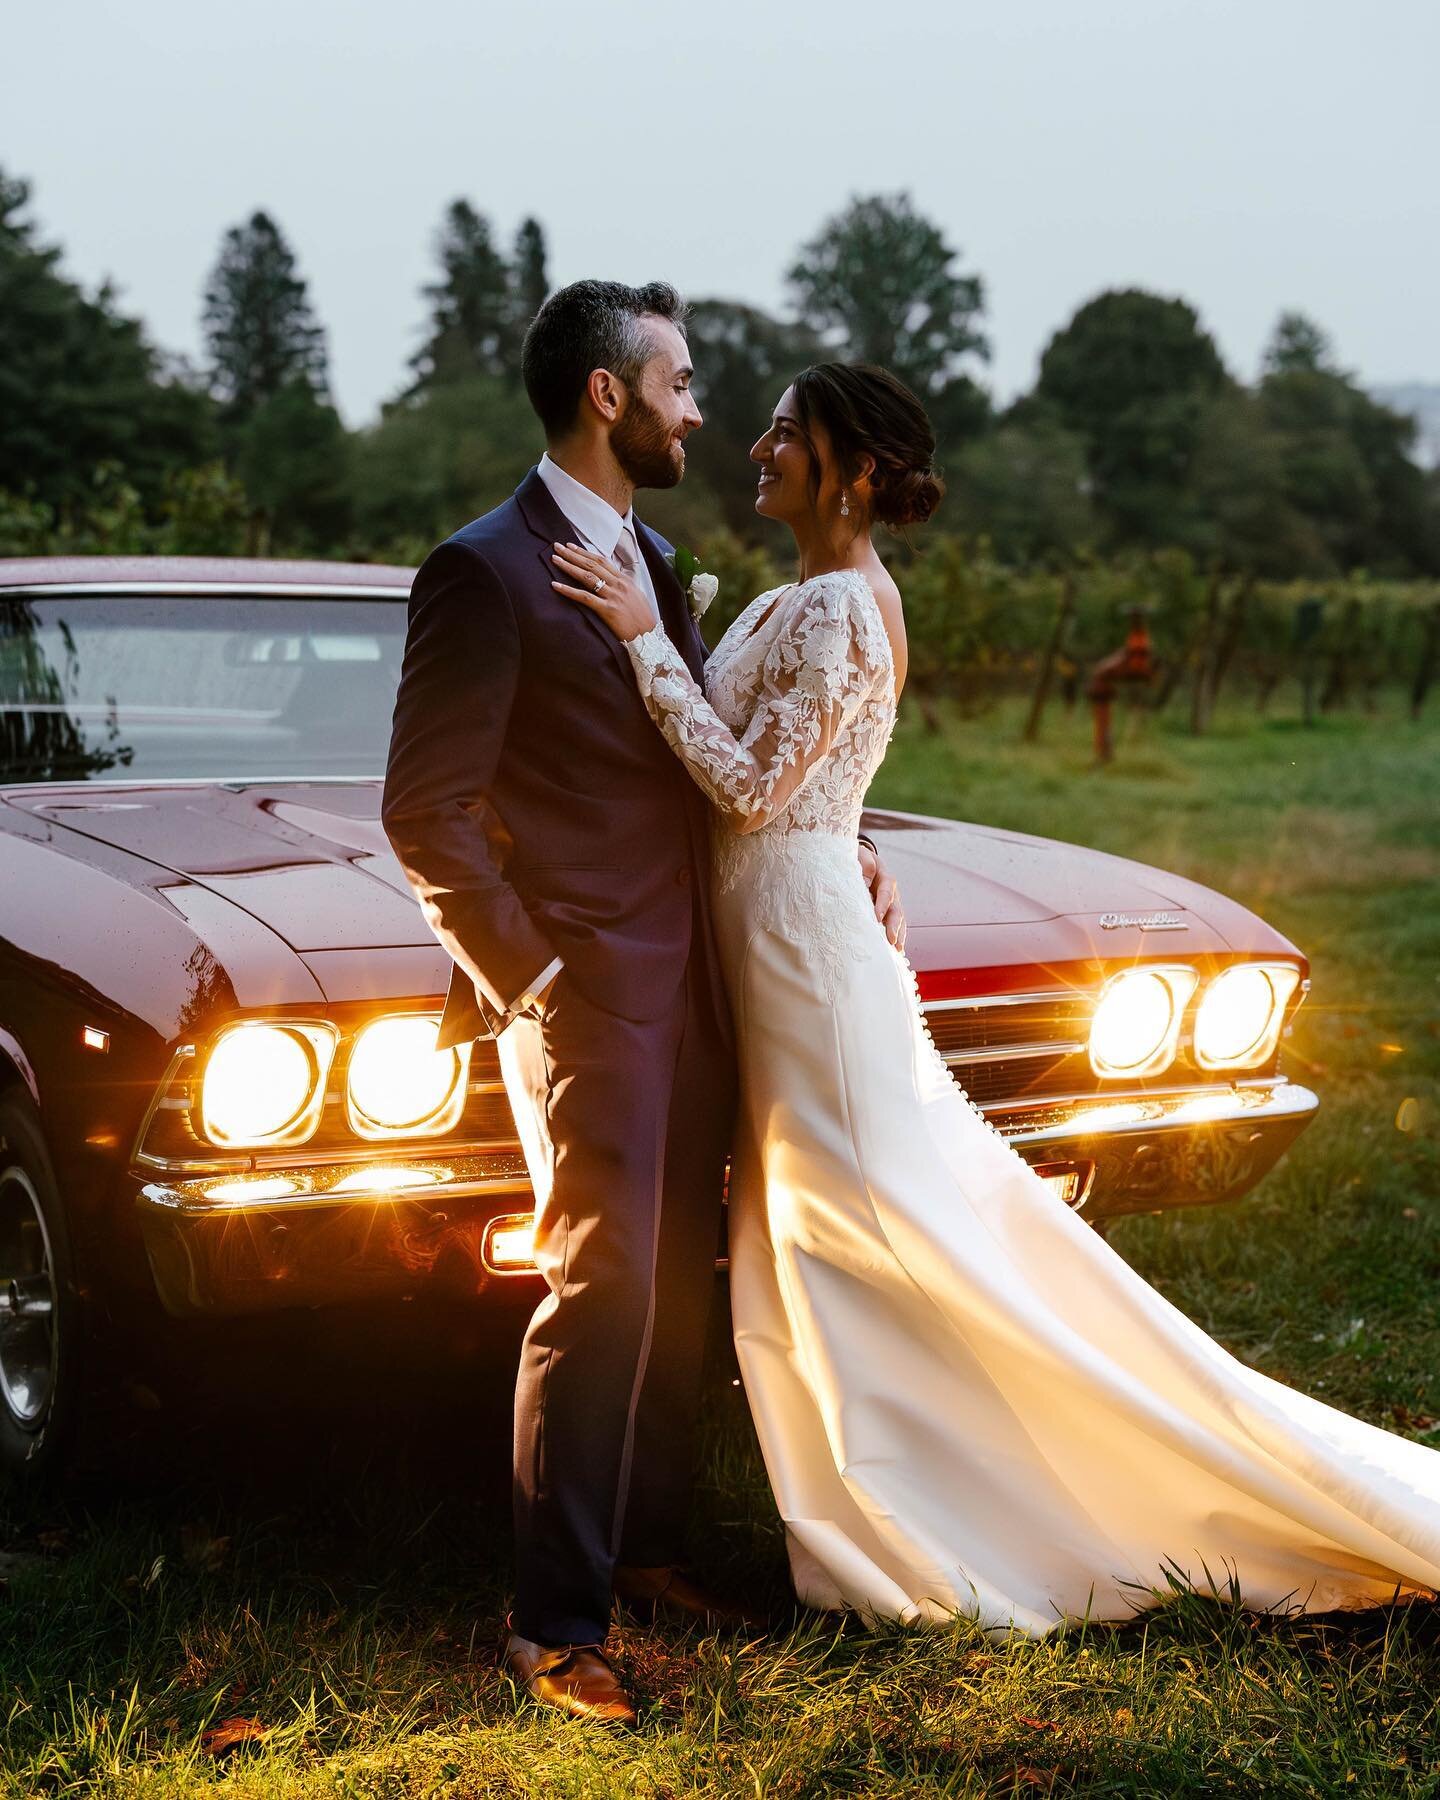 RI vineyards on a rainy fall day and vintage car wedding vibes are some of my fav 🍇 

Second shooting for @merrisacarolinephotography 

#newenglandwedding #newenglandweddingphotographer #newenglandphotography #rivineyards #vineyardwedding #rainywedd